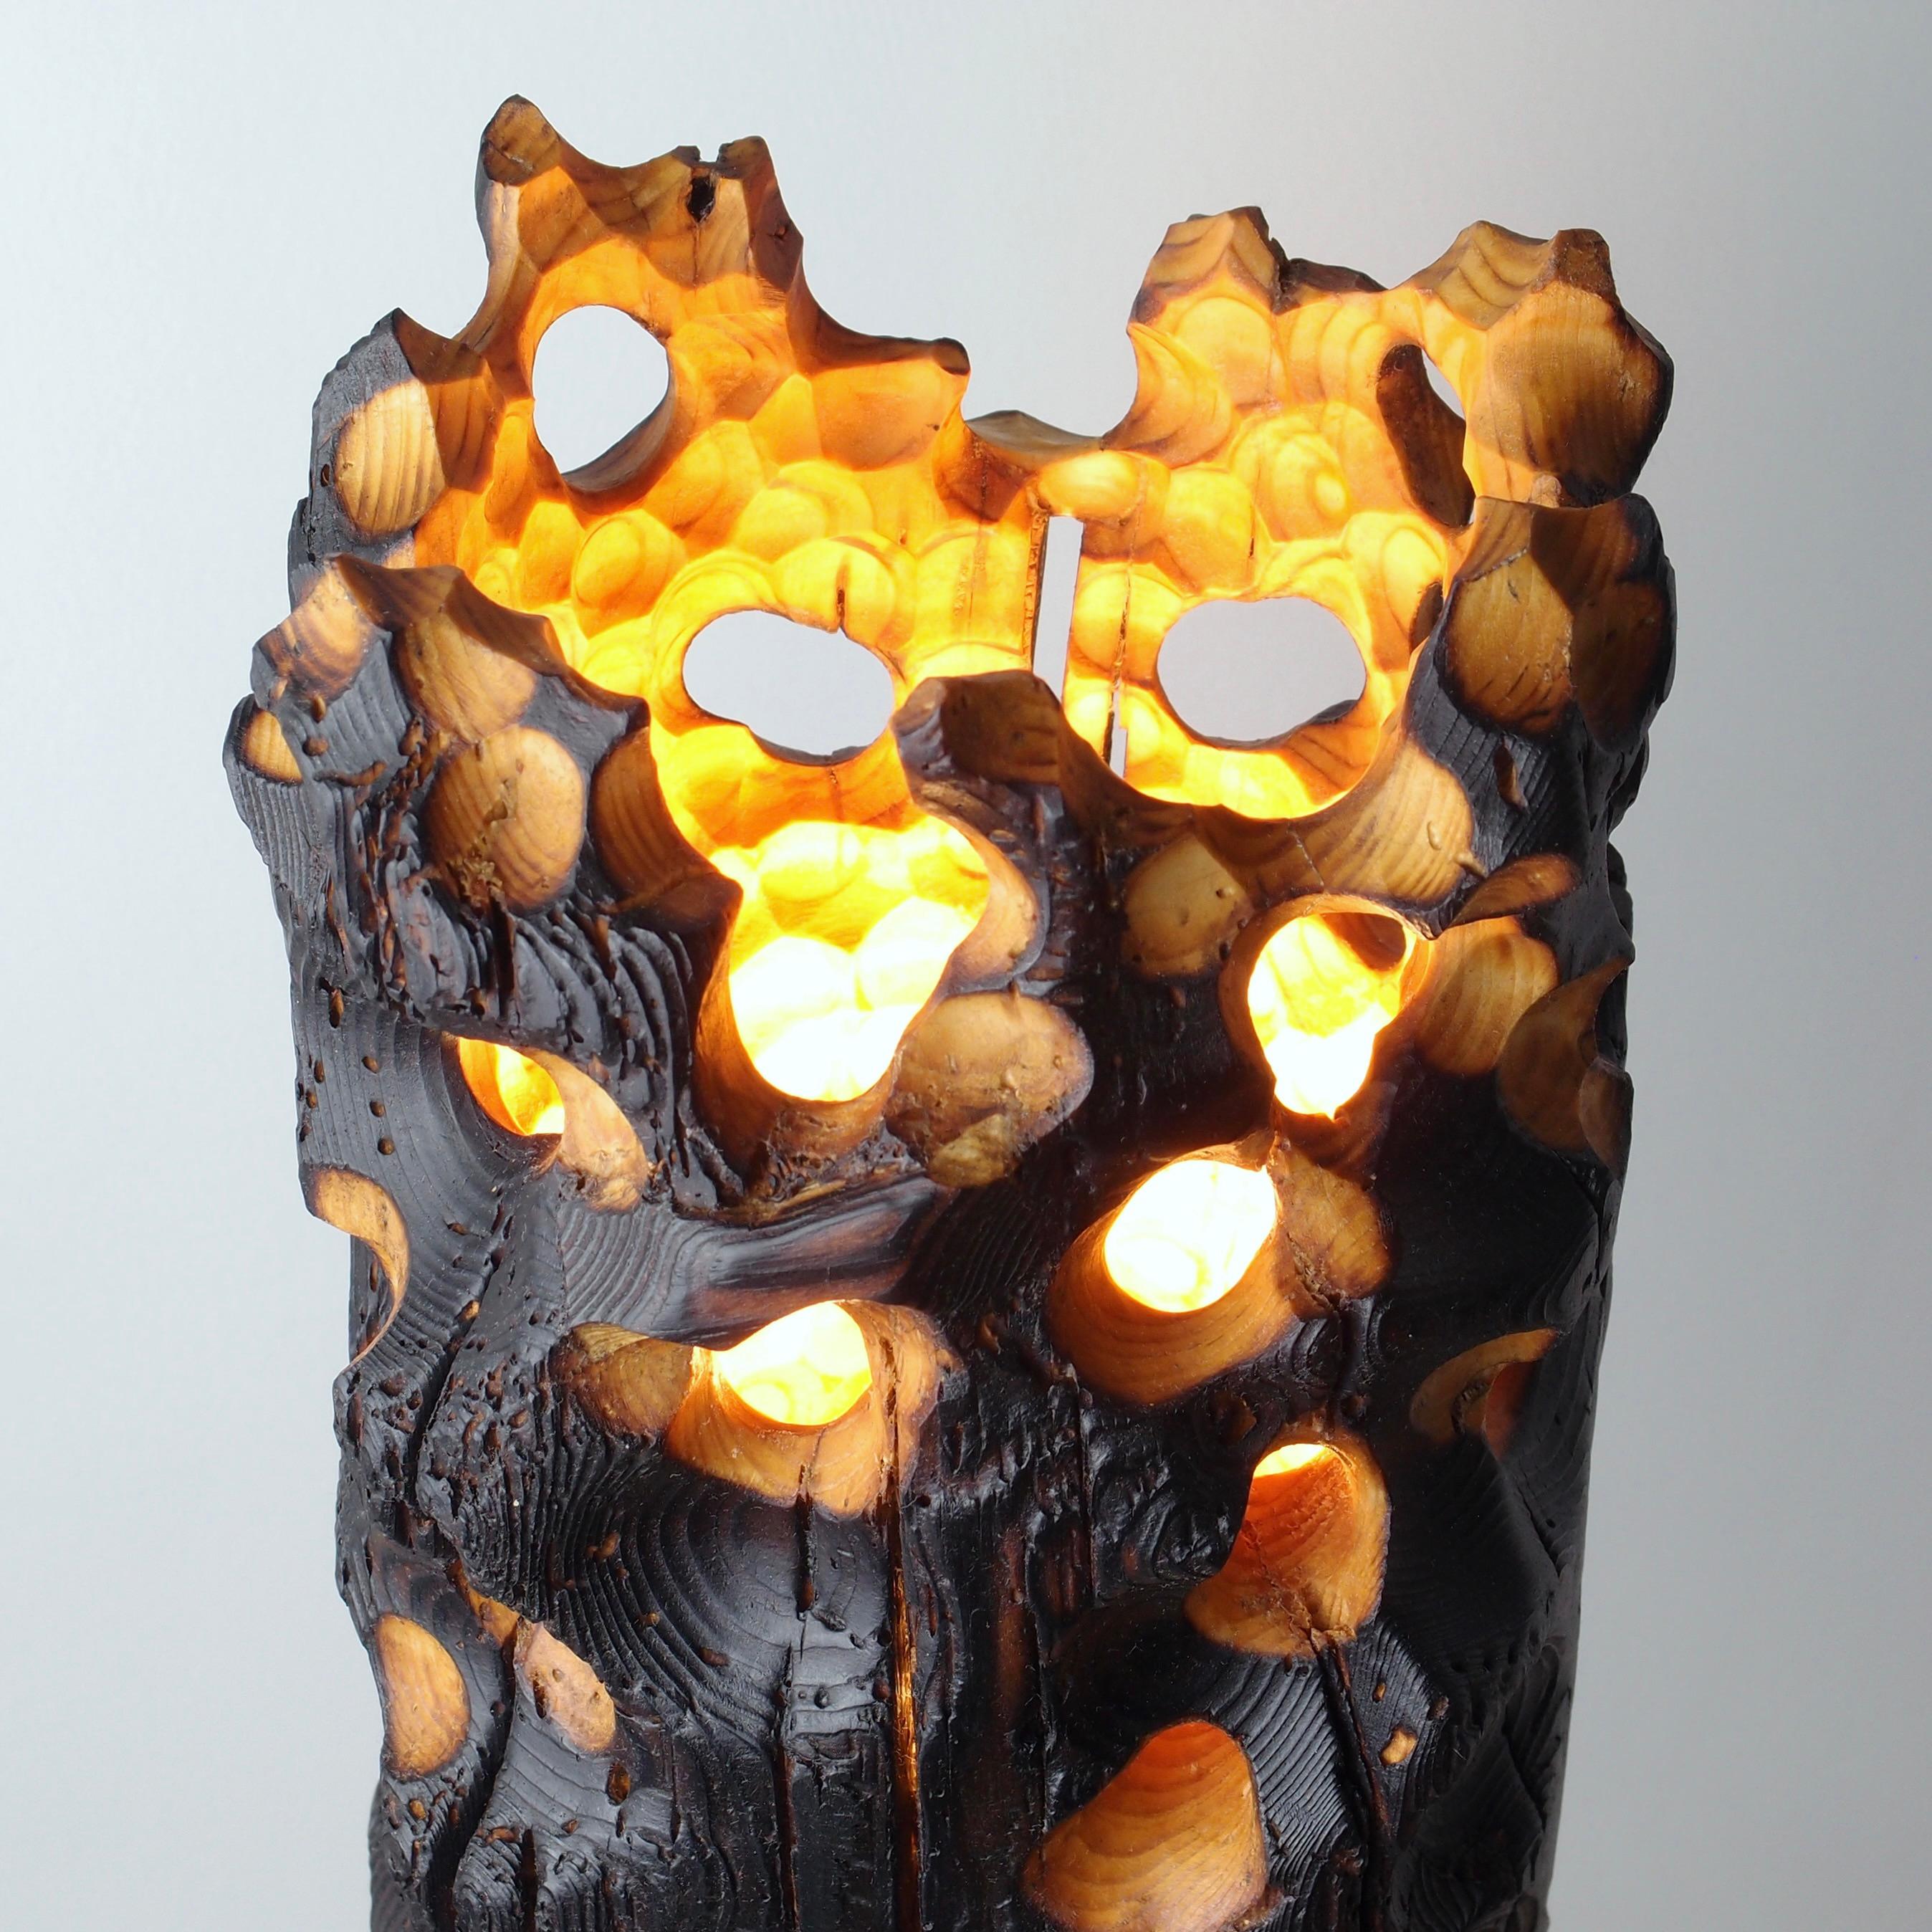 Blackened Torch, Sculptured Lighting, Table Lamp from Reclaimed Burned Wood and Stone For Sale